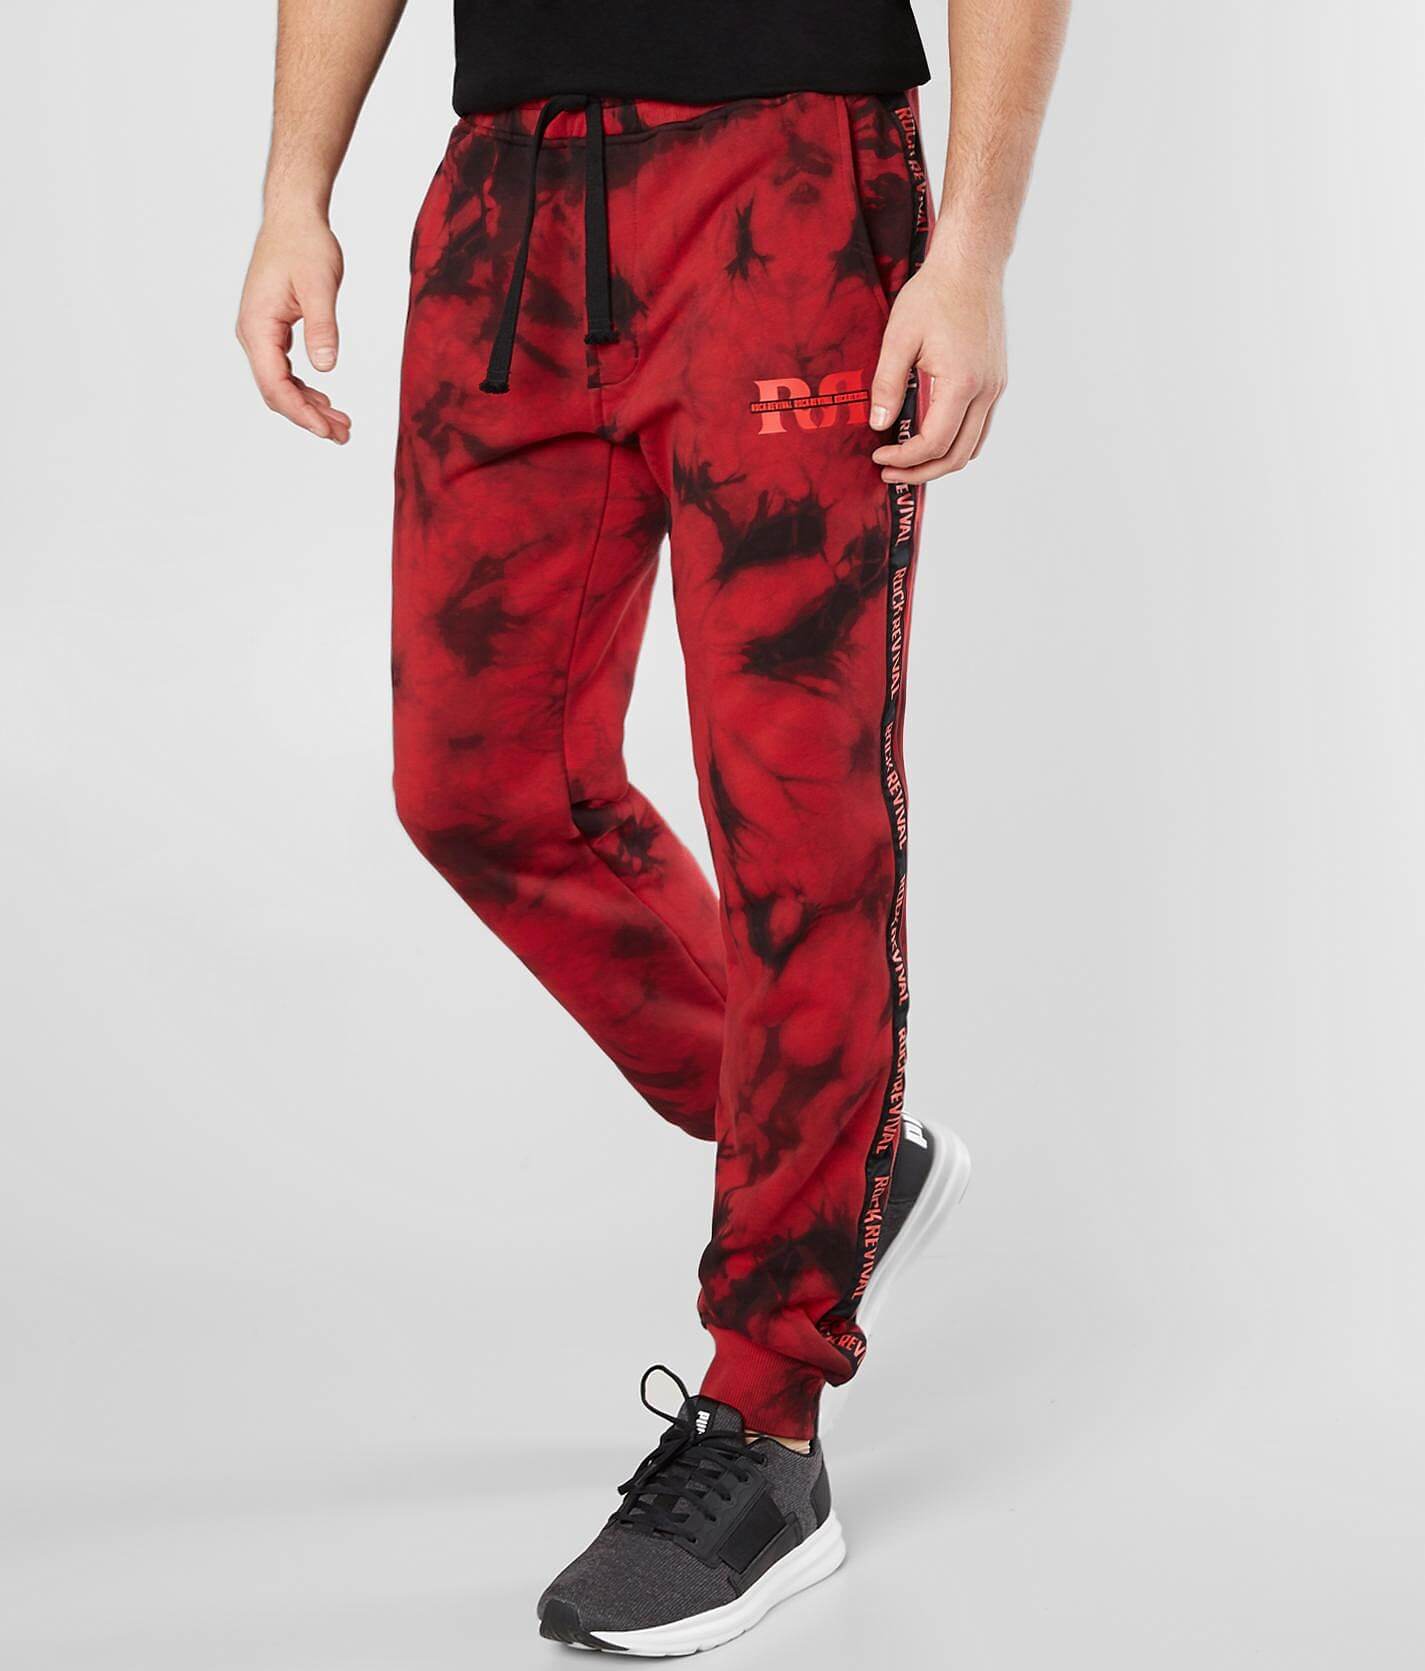 black and red rock revival jeans